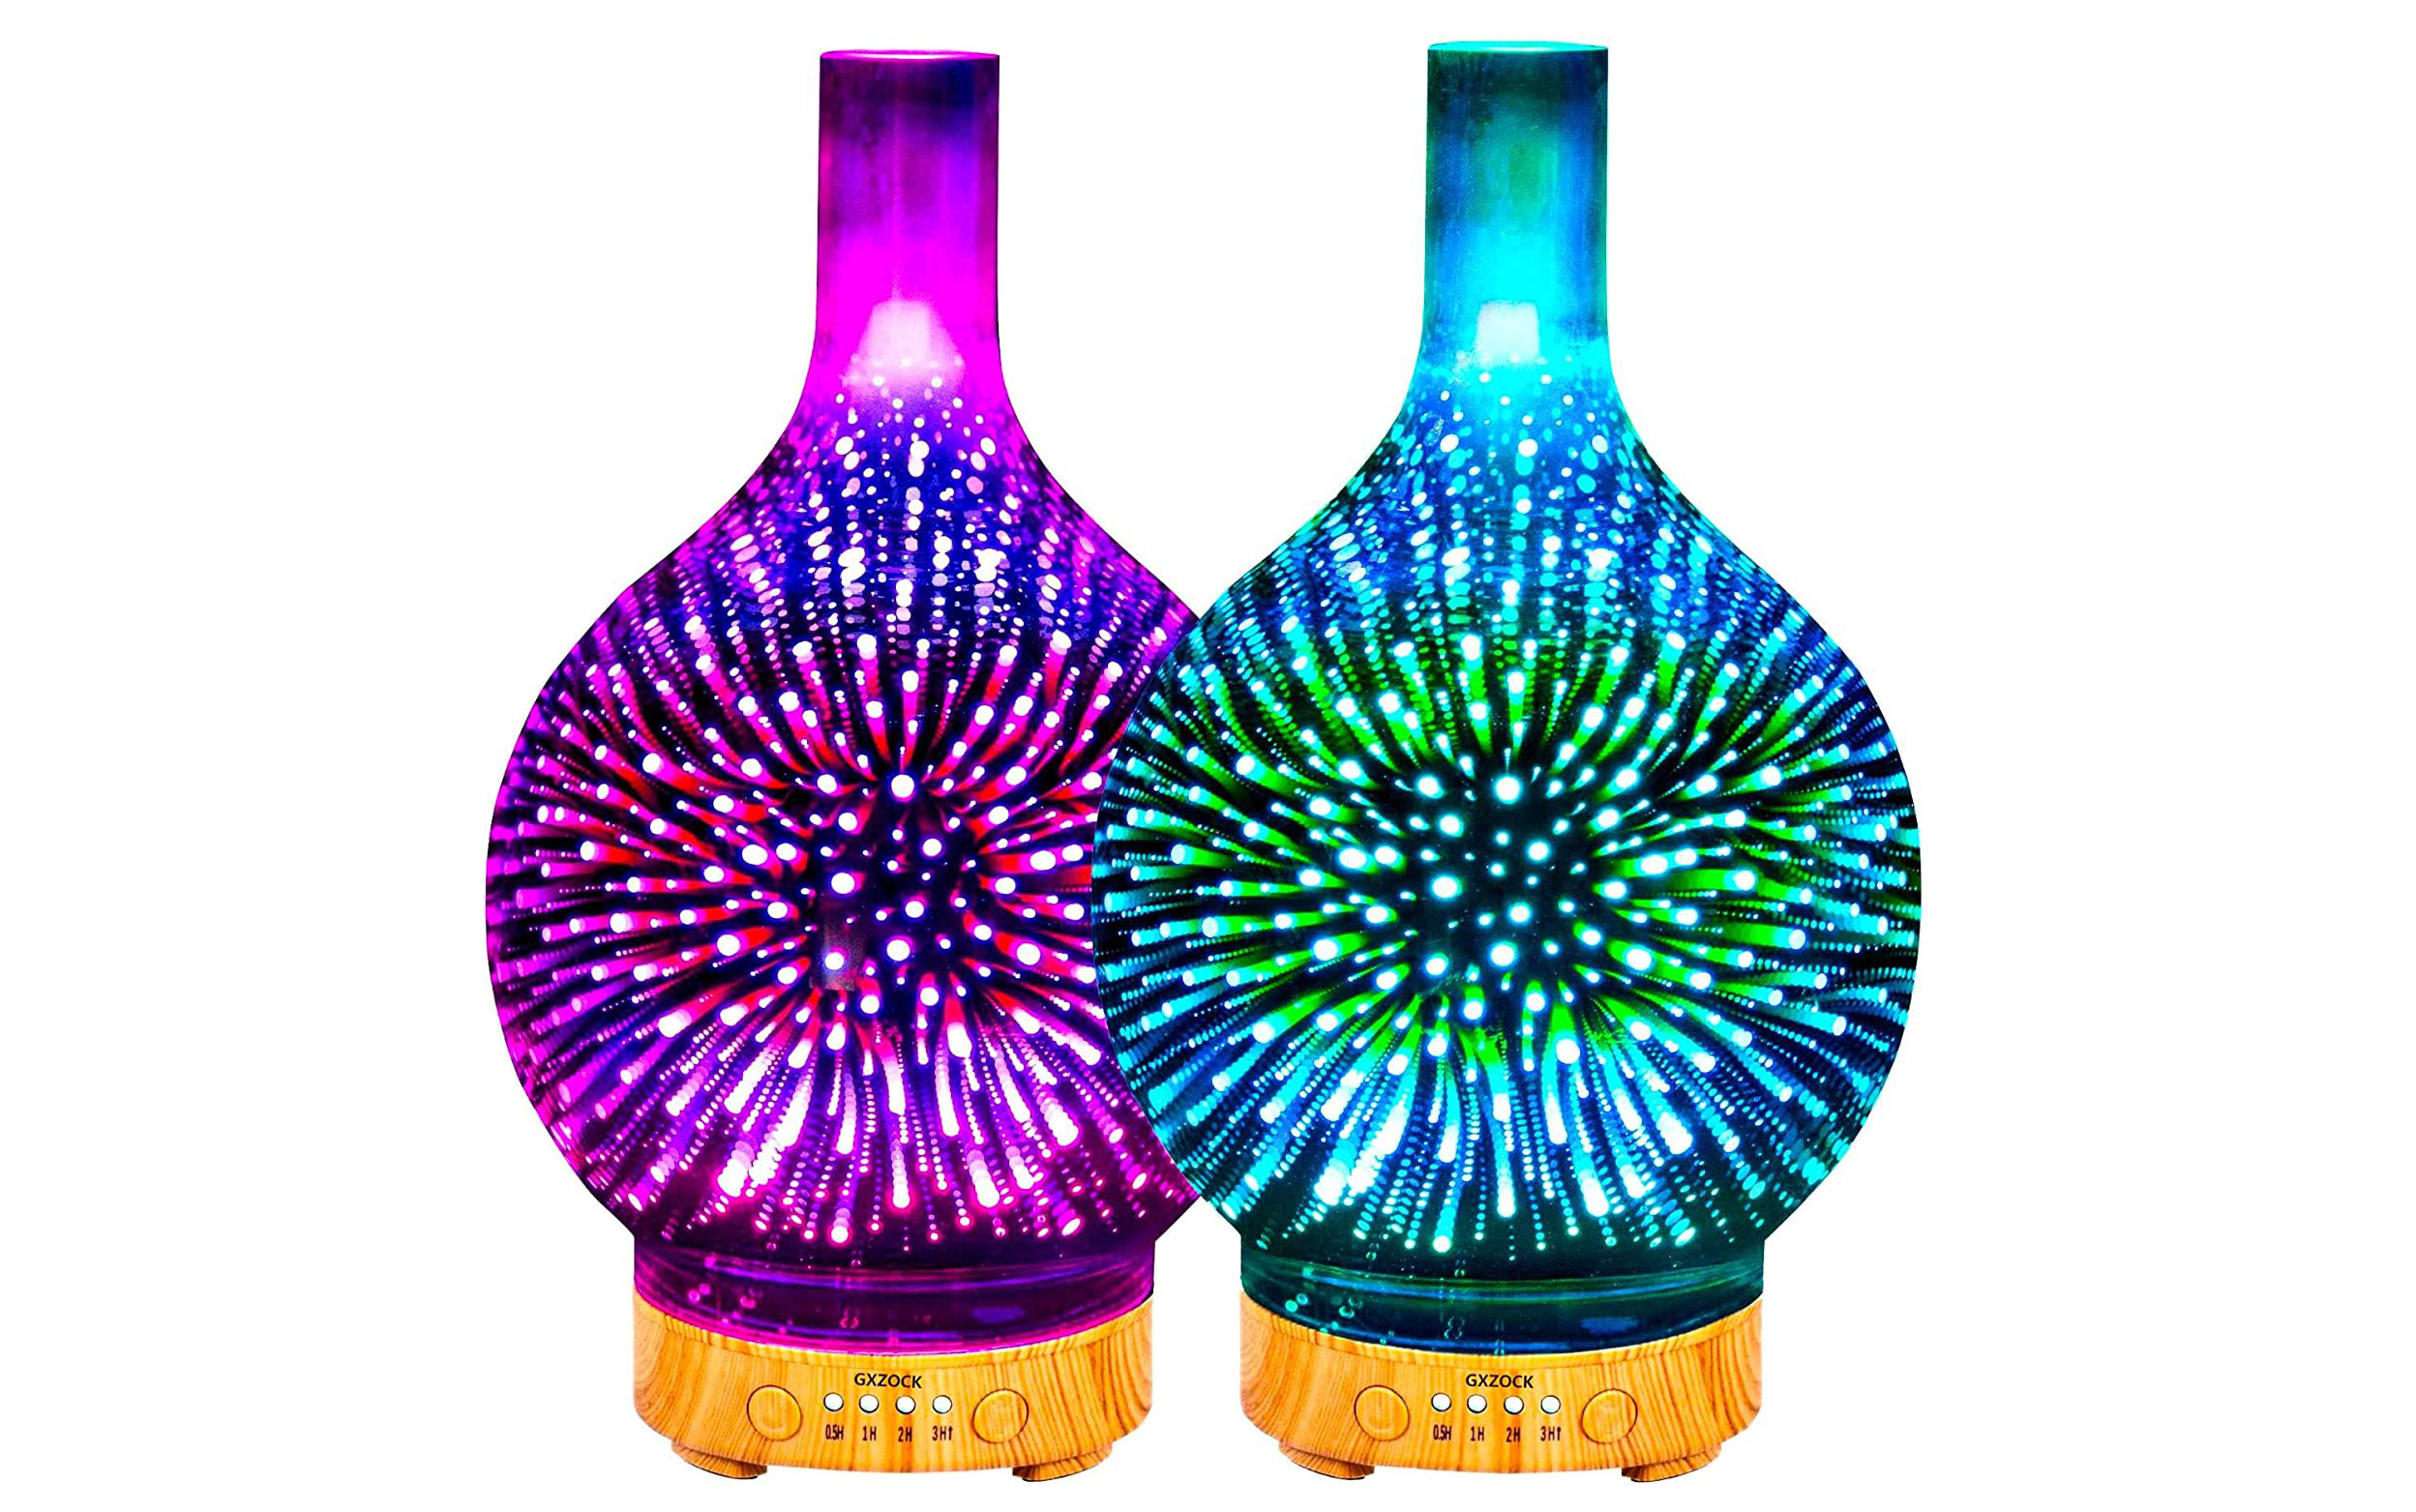 09 The essential oil diffusers with glass sphere with 3D effect